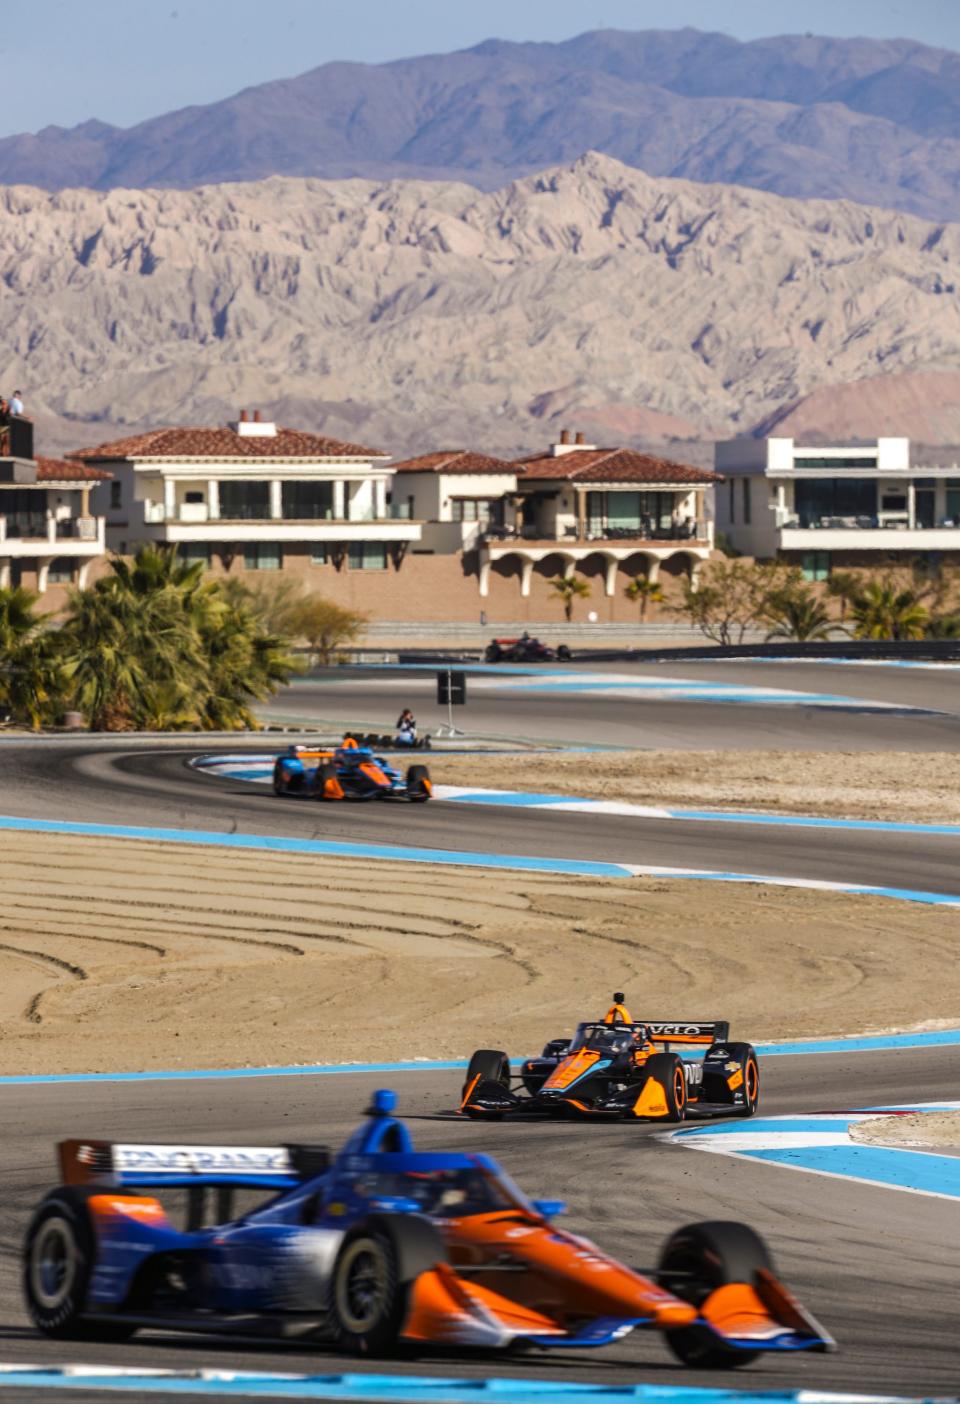 Pato O'Ward of Arrow McLaren (middle) rounds turn 13 ahead of teammate Felix Rosenqvist and behind Scott Dixon of Chip Ganassi Racing during day two of NTT IndyCar Series open testing at The Thermal Club in Thermal, Calif., Friday, Feb. 3, 2023.